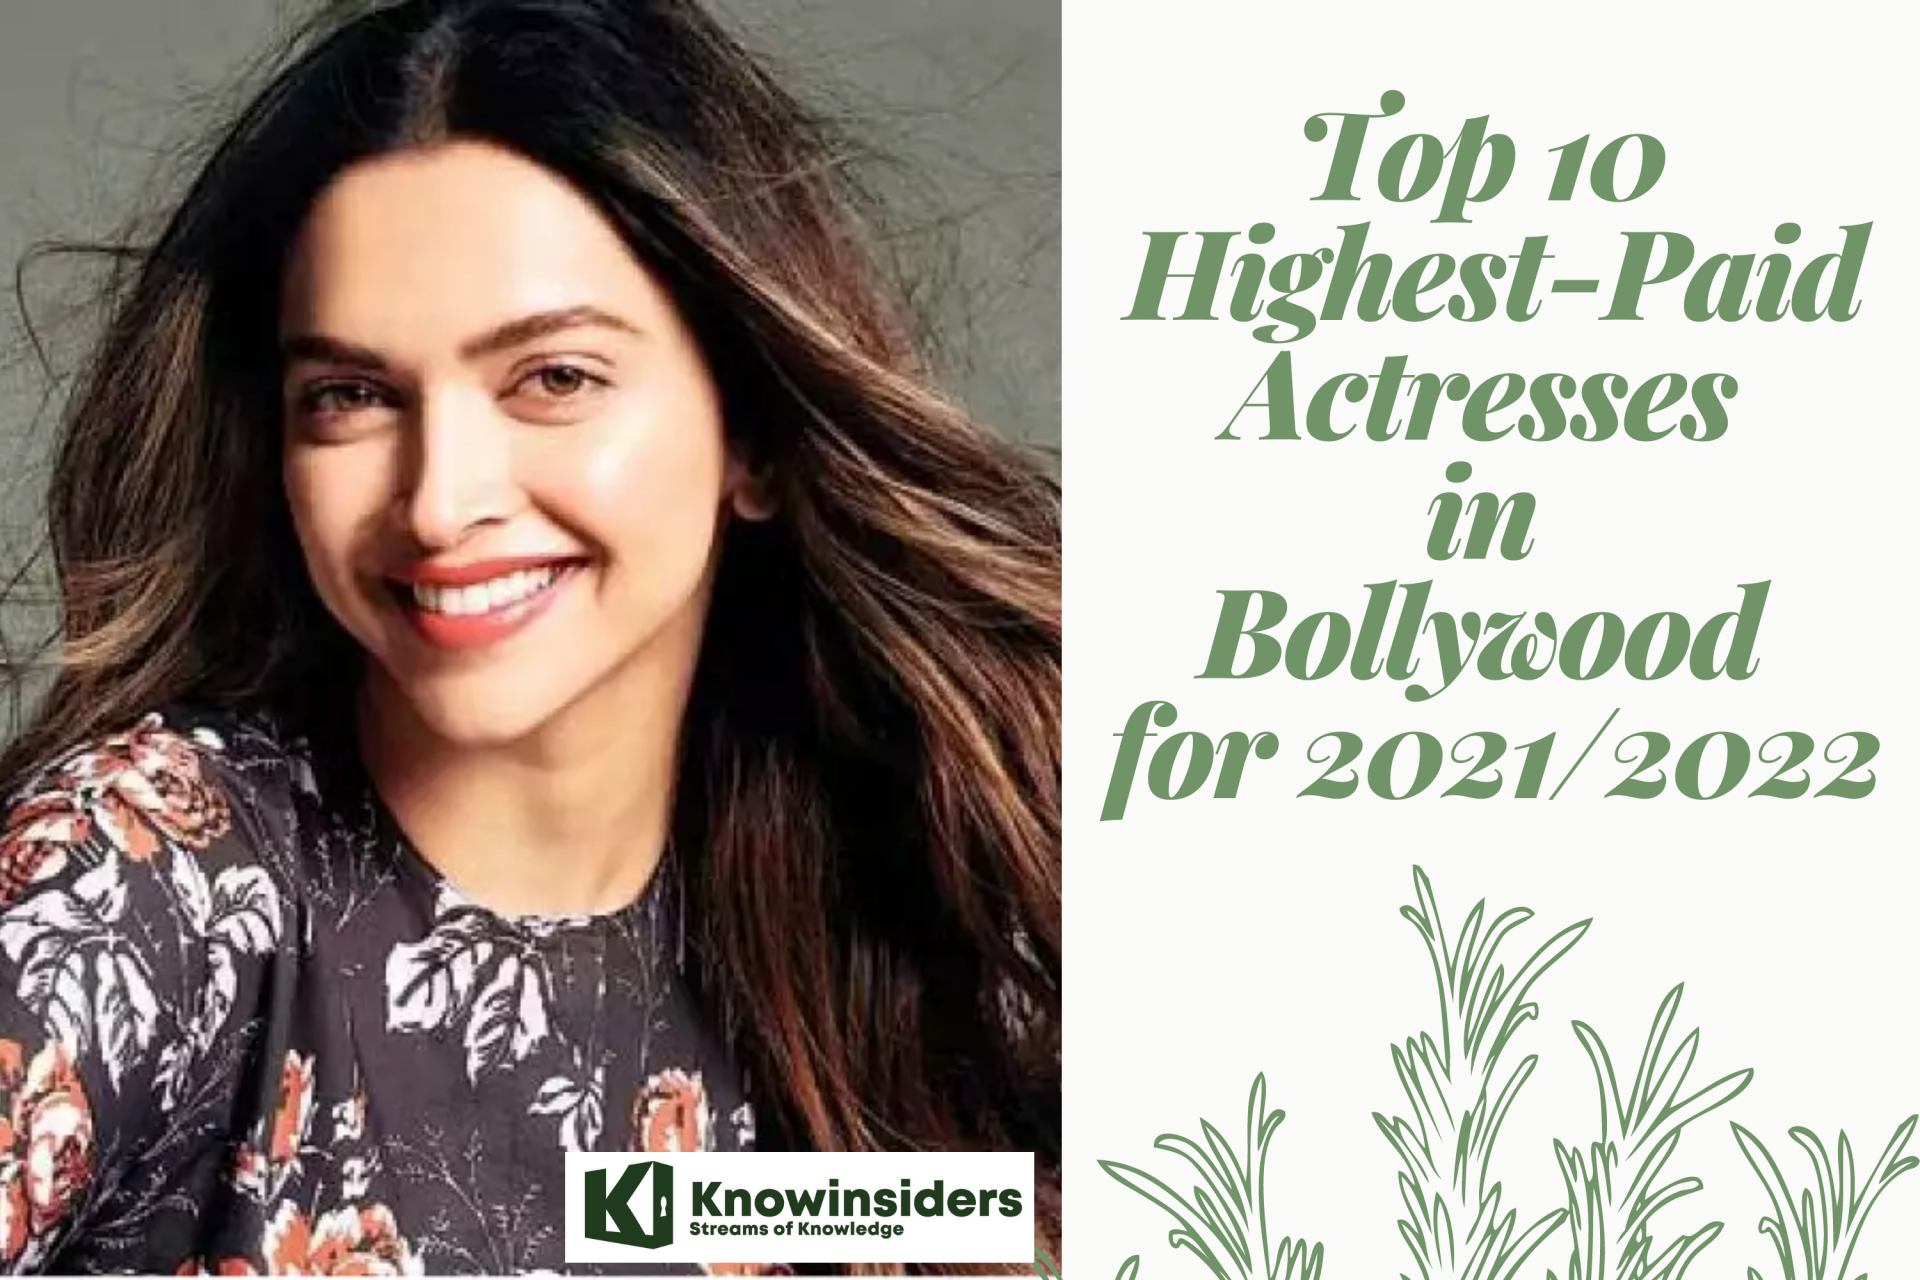 Top 10 Highest Paid Actresses in Bollywood 2022/2023